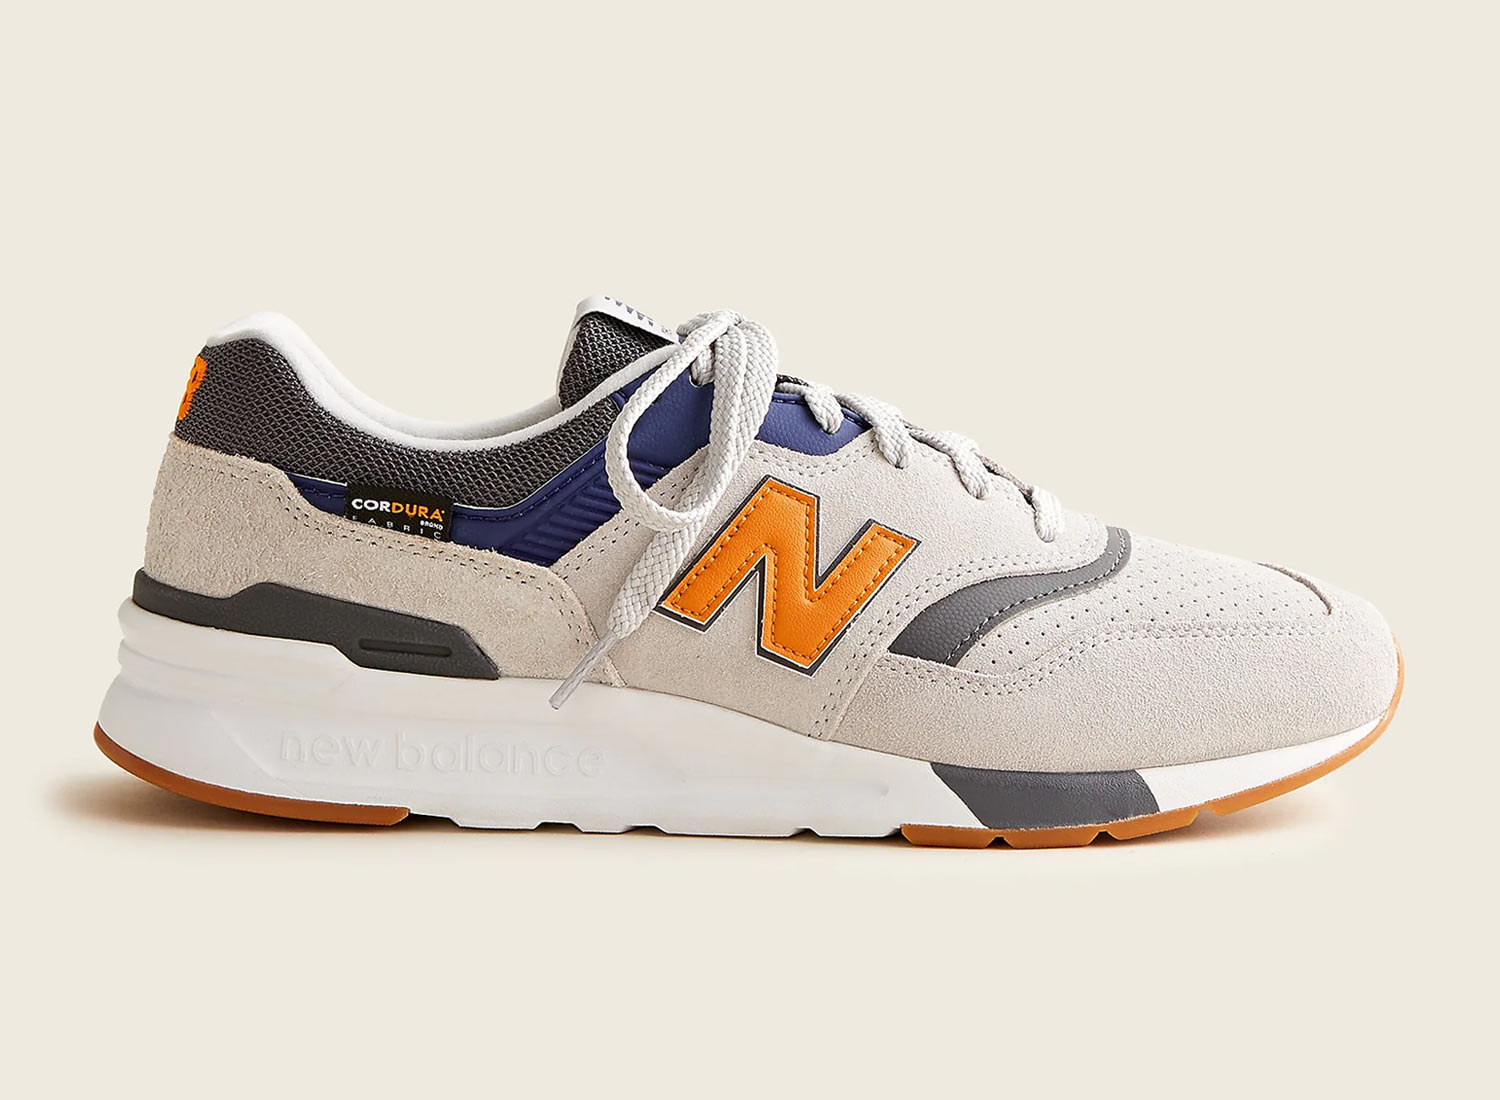 J.Crew's Latest New Balance Exclusive Just Dropped